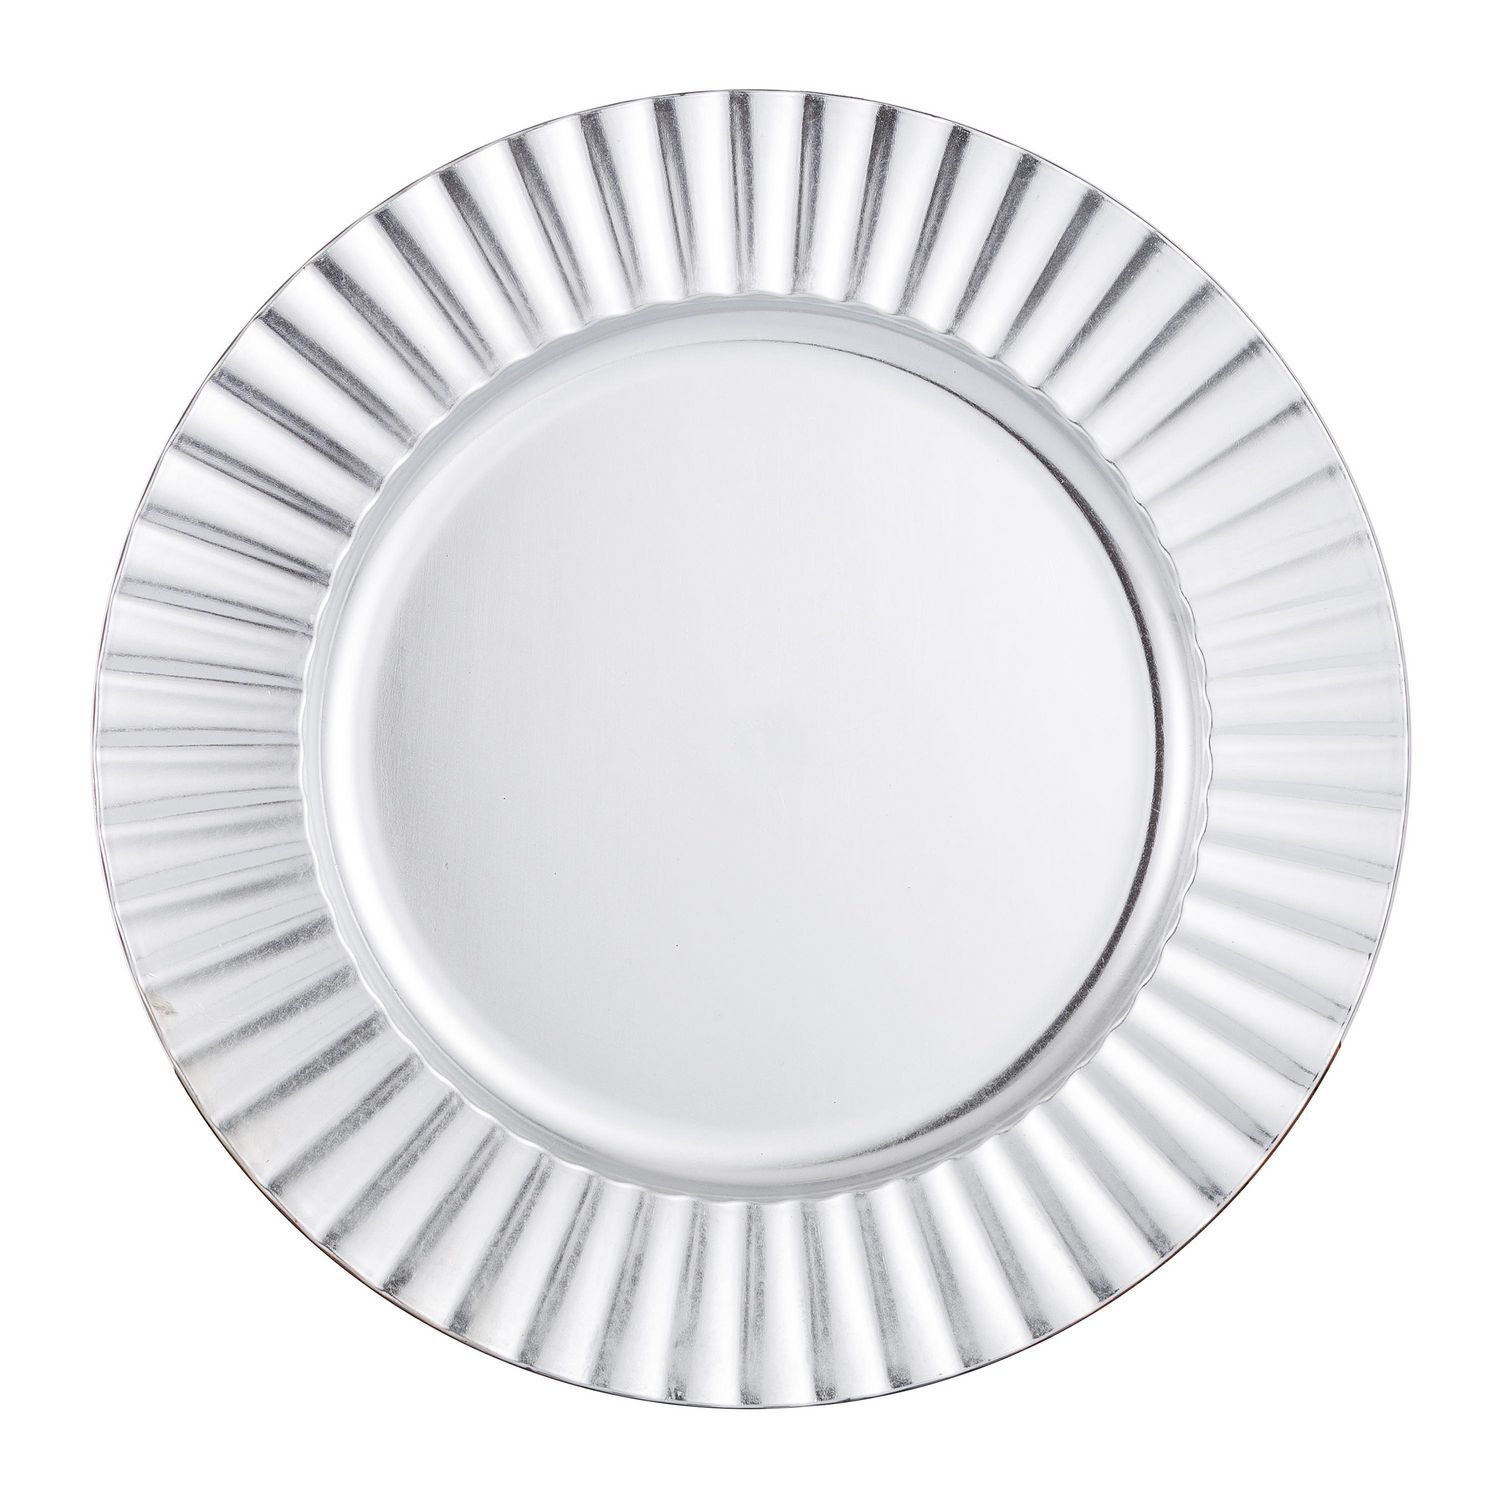 Holiday Time 13 Inch Fluted Charger Plates | Walmart Canada